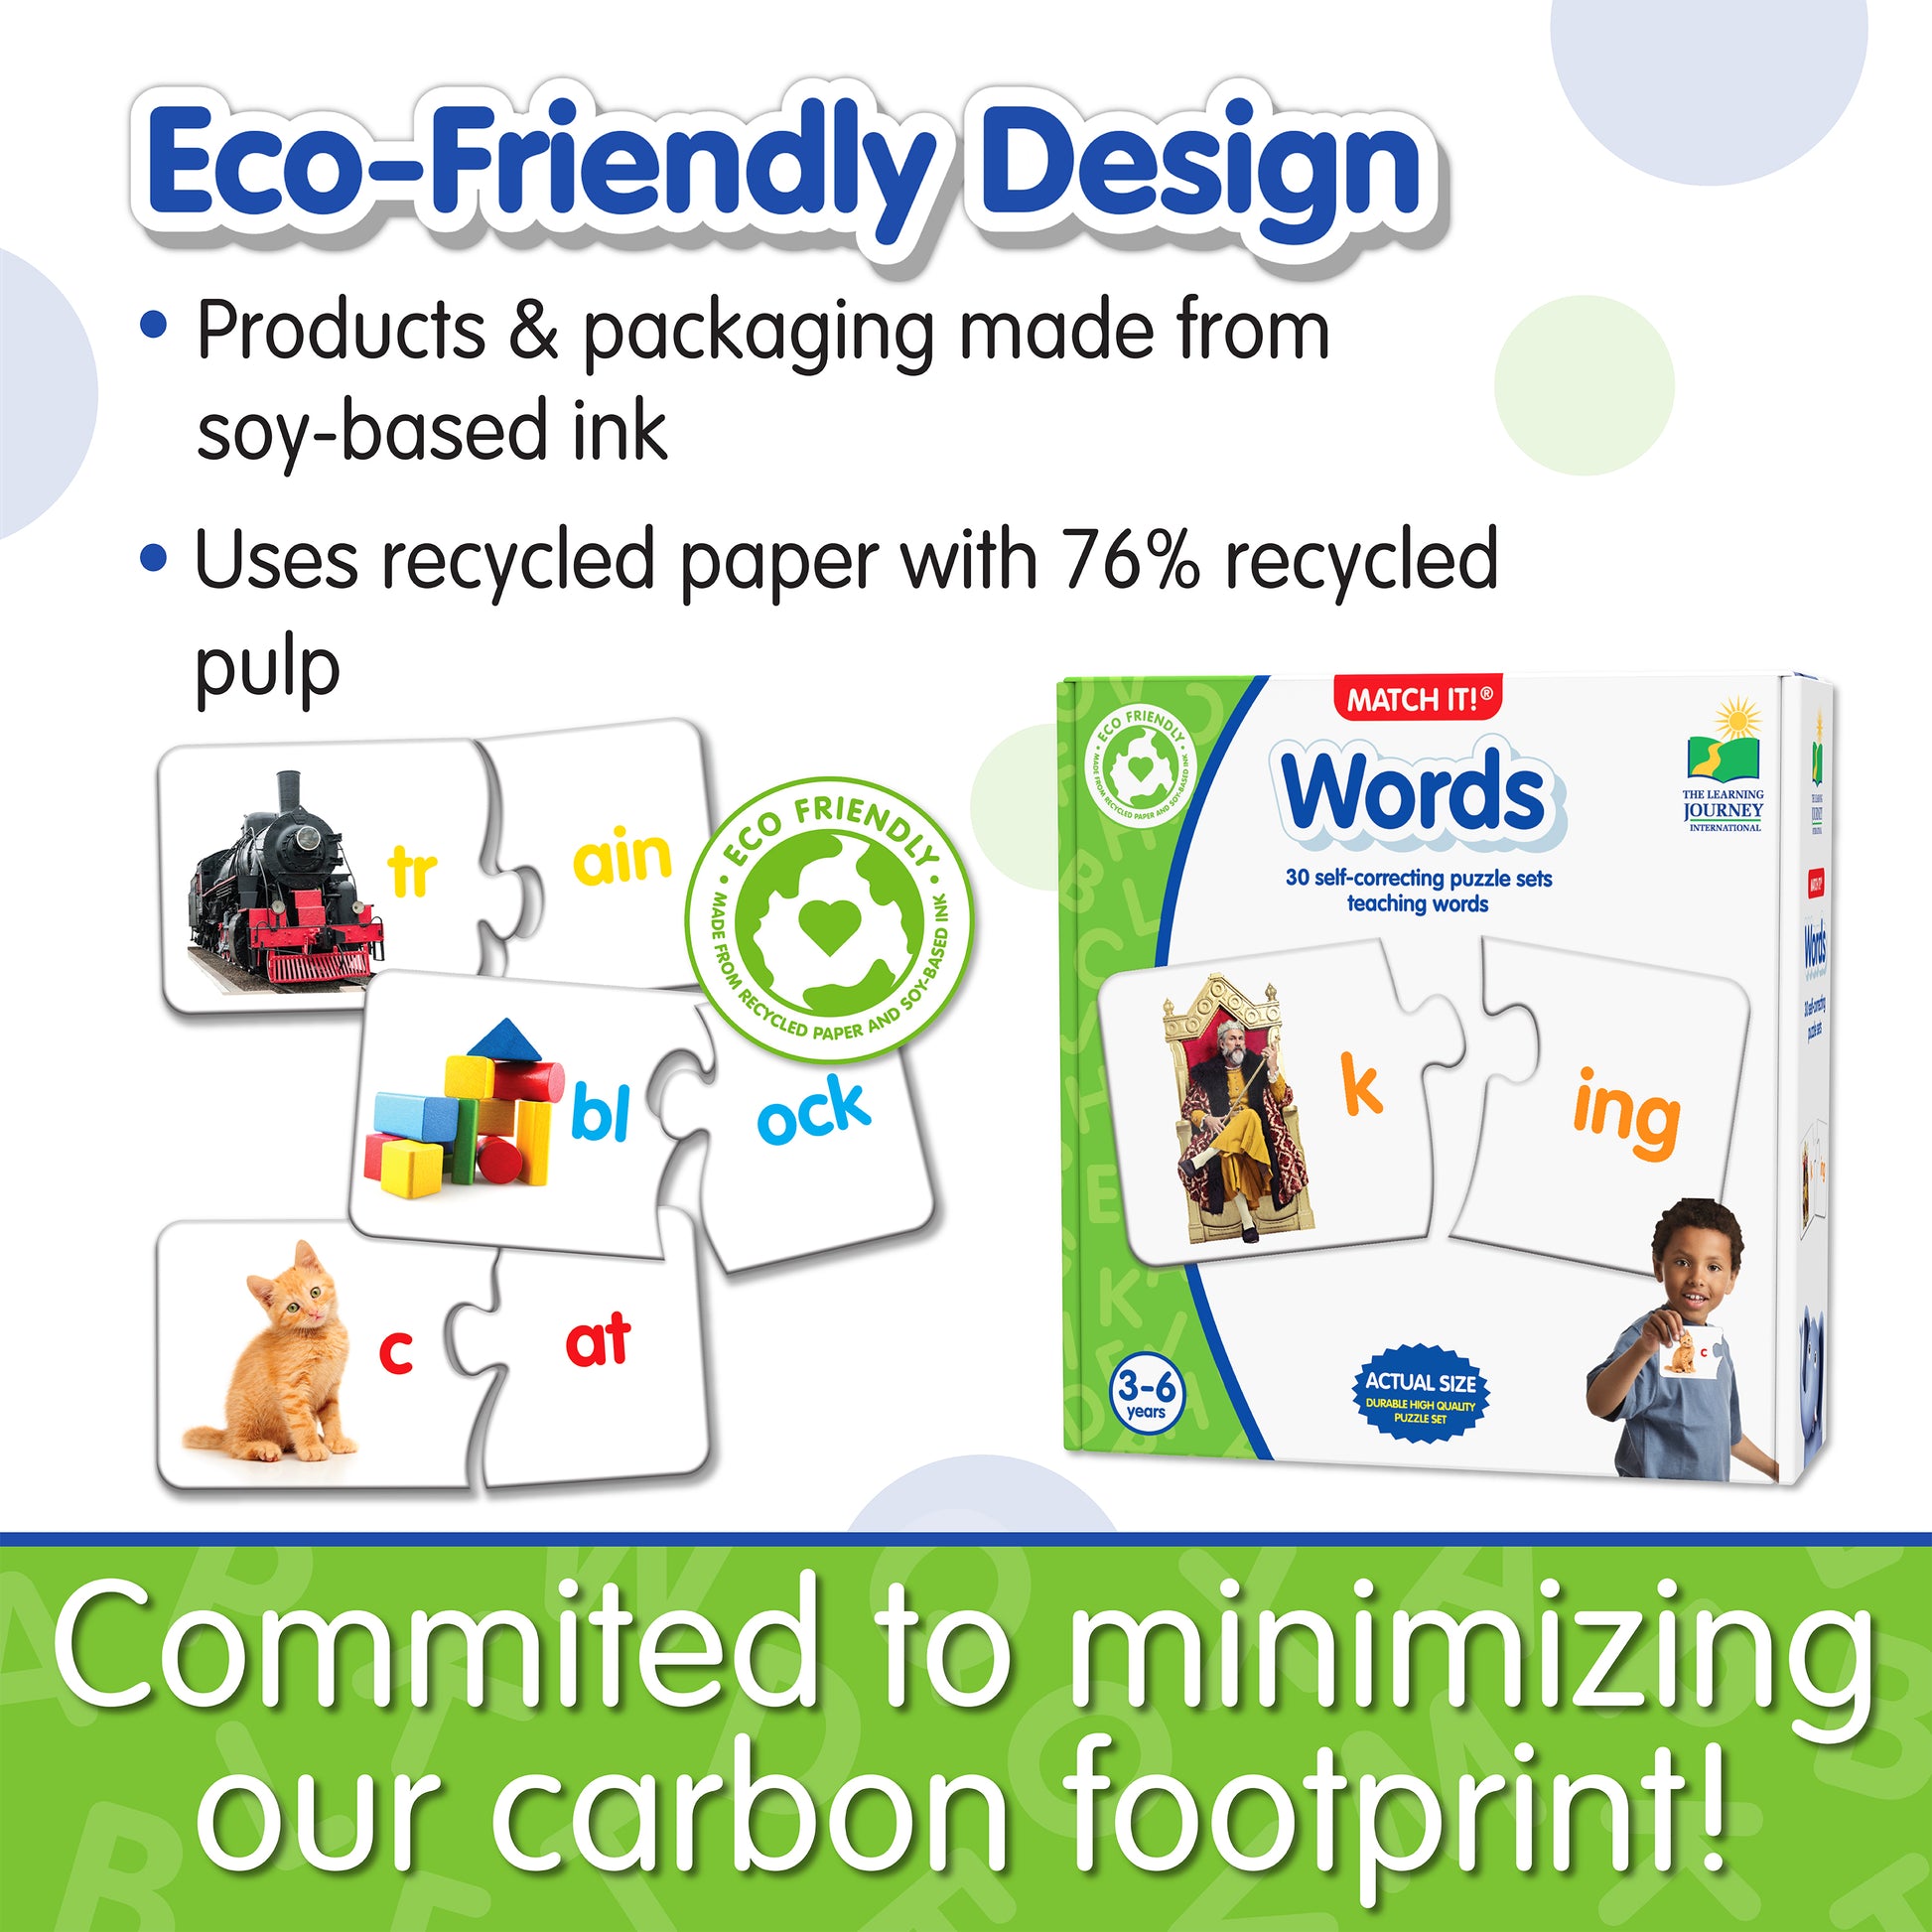 Infographic about Match It - Words' eco-friendly design that says, "Committed to minimizing our carbon footprint!"